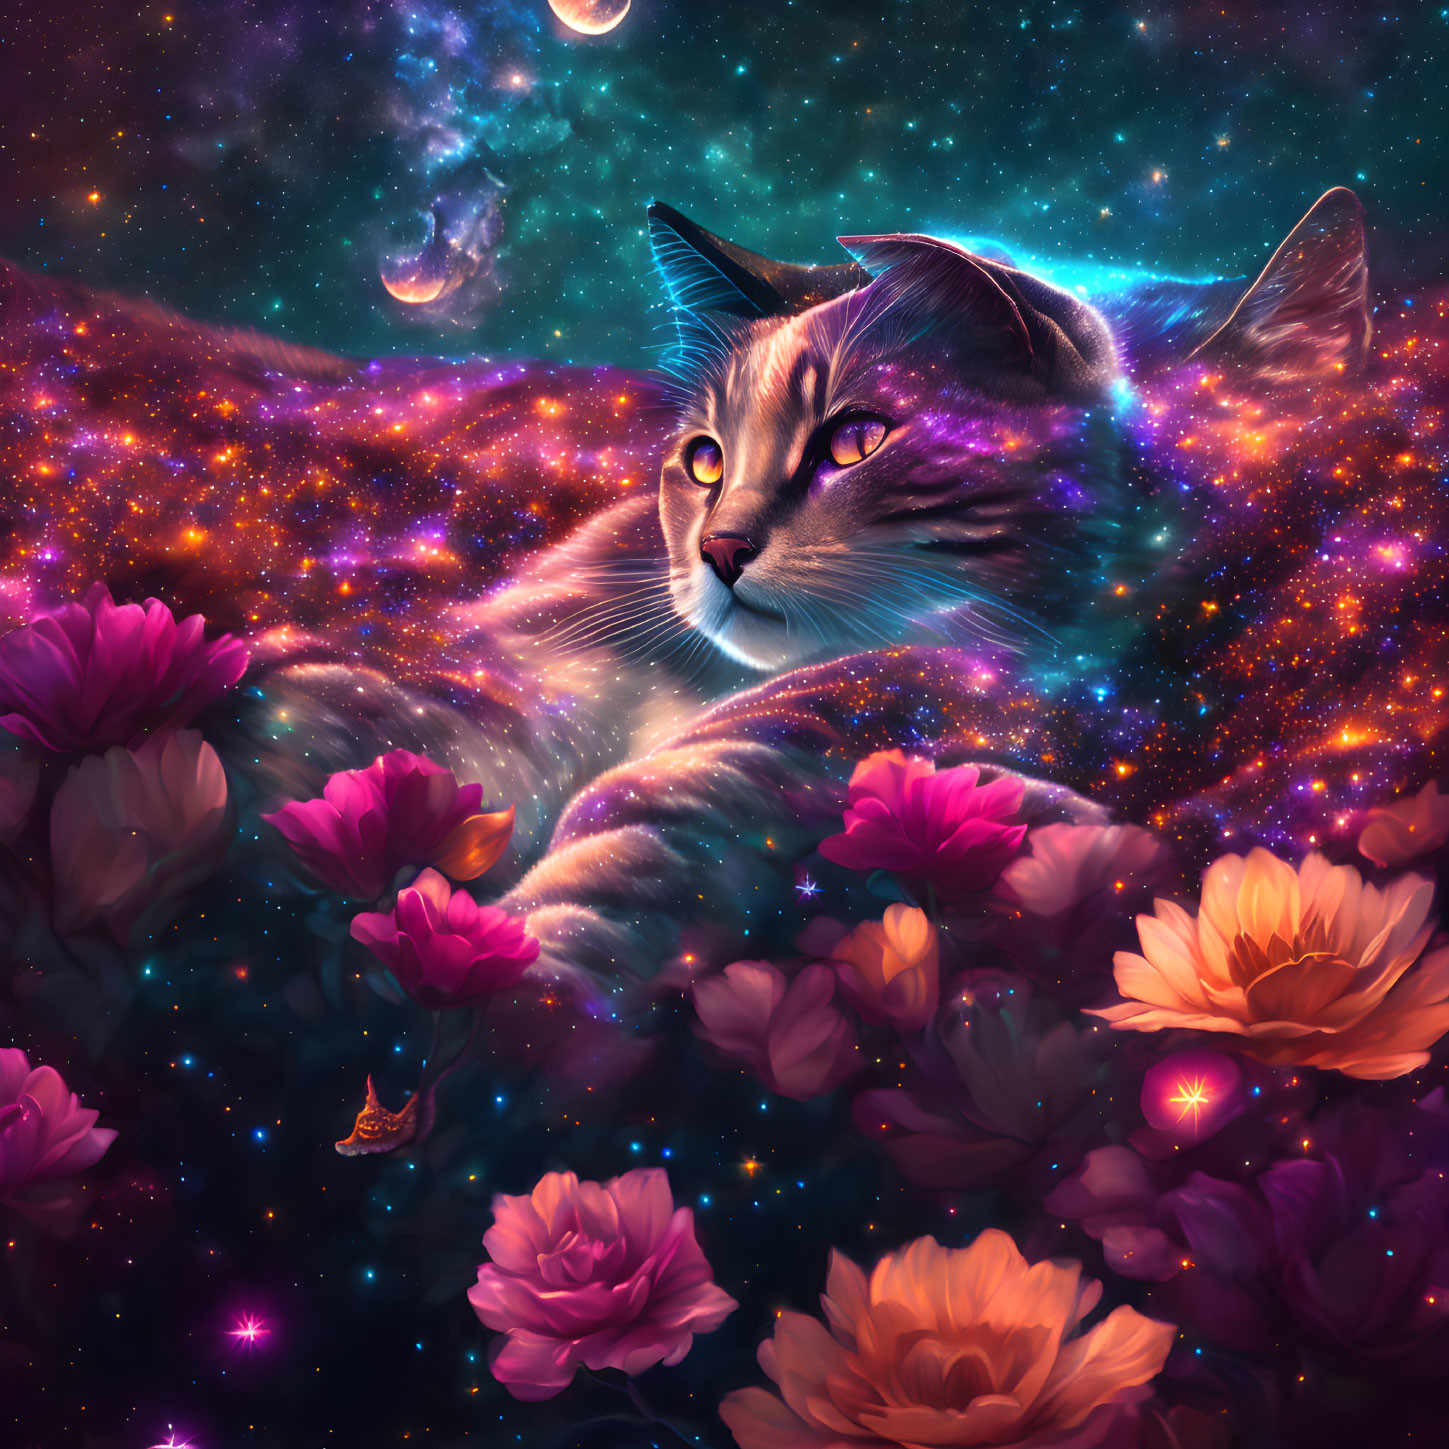 Cat's head in cosmic galaxy with flowers and celestial elements